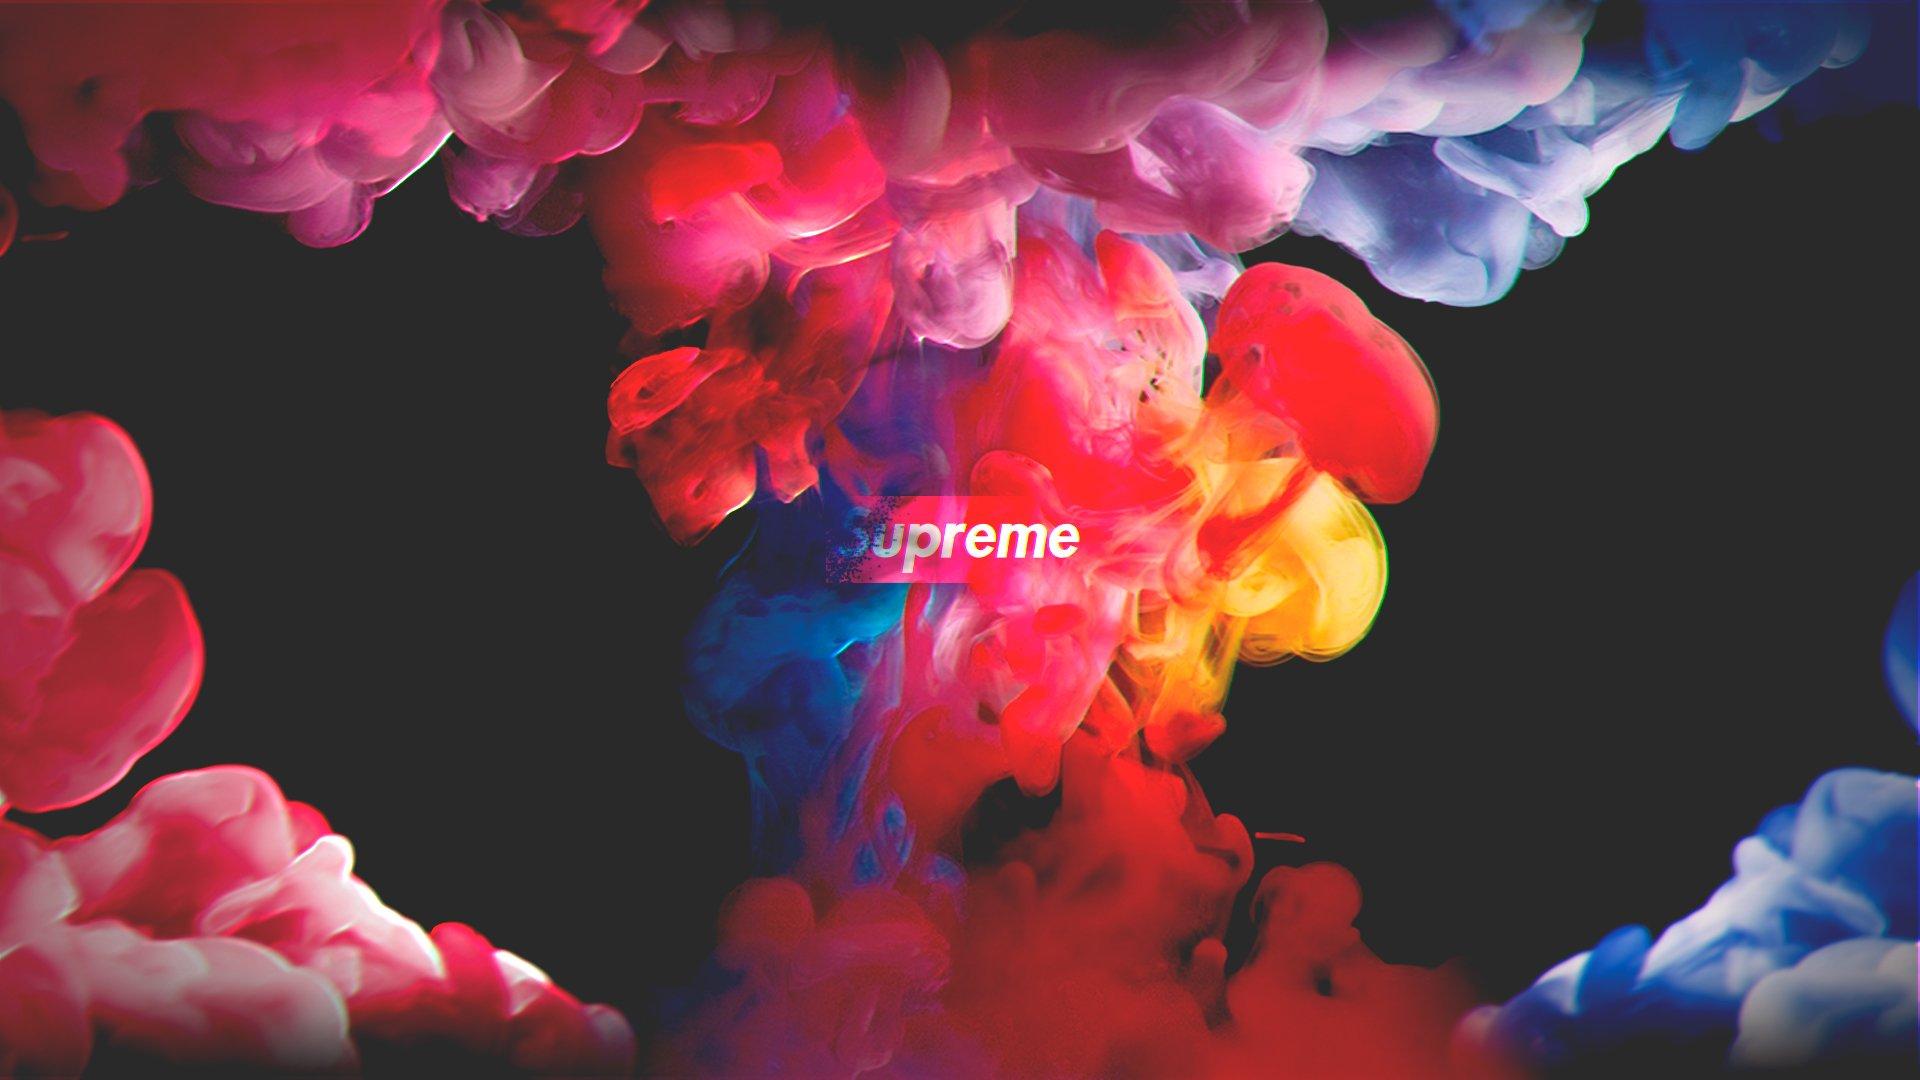 Supreme HD Wallpaper and Background Image